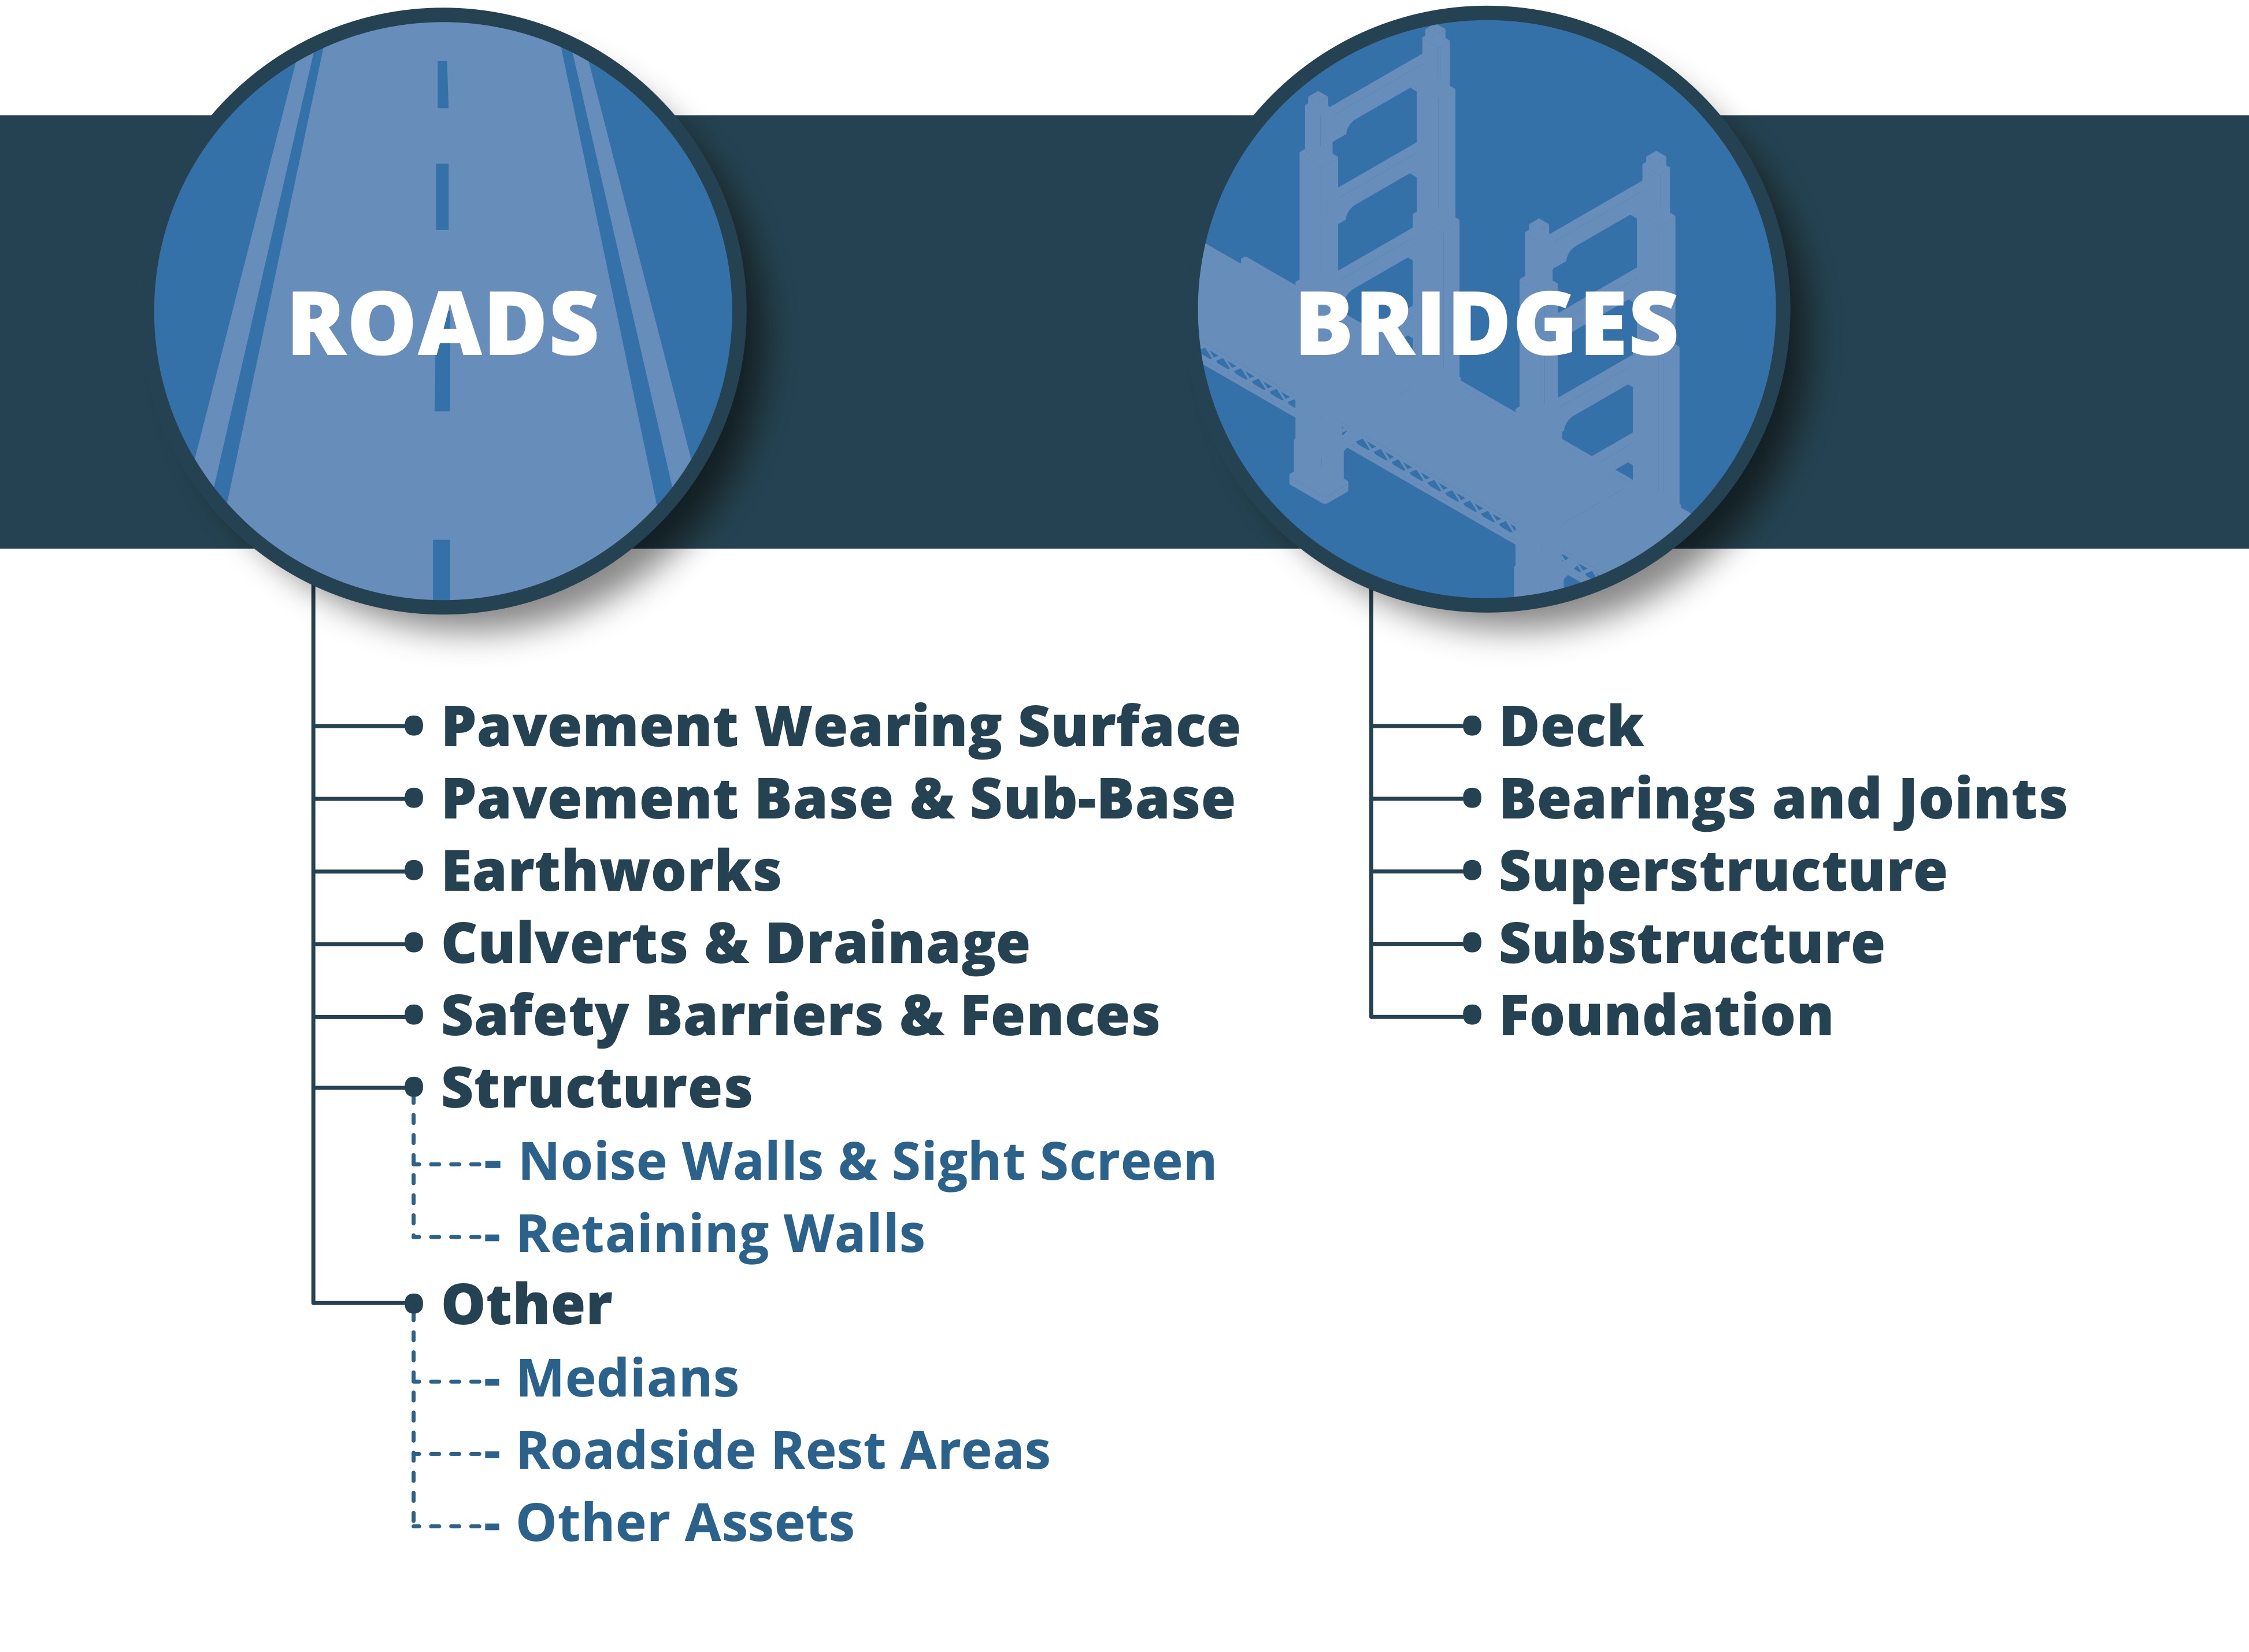 components of roads and bridges at the Australian road authority